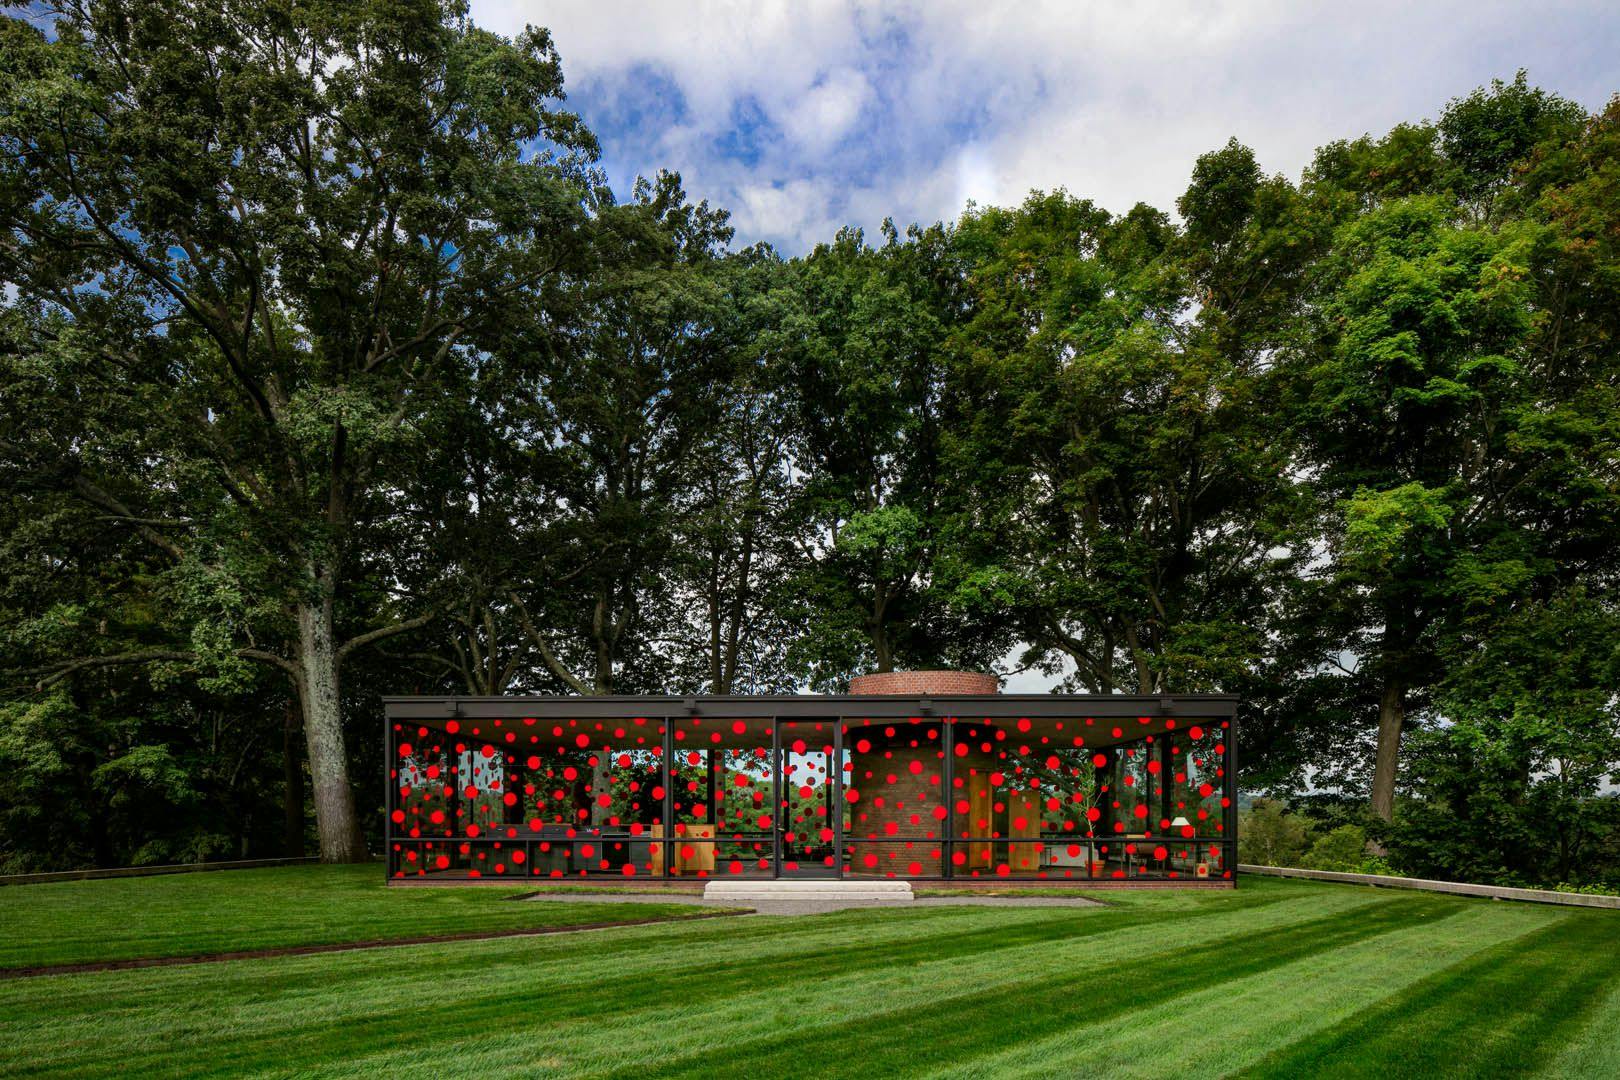 Installation view of the exhibition Yayoi Kusama: Narcissus Garden at the Philip Johnson Glass House in Connecticut, dated 2016.